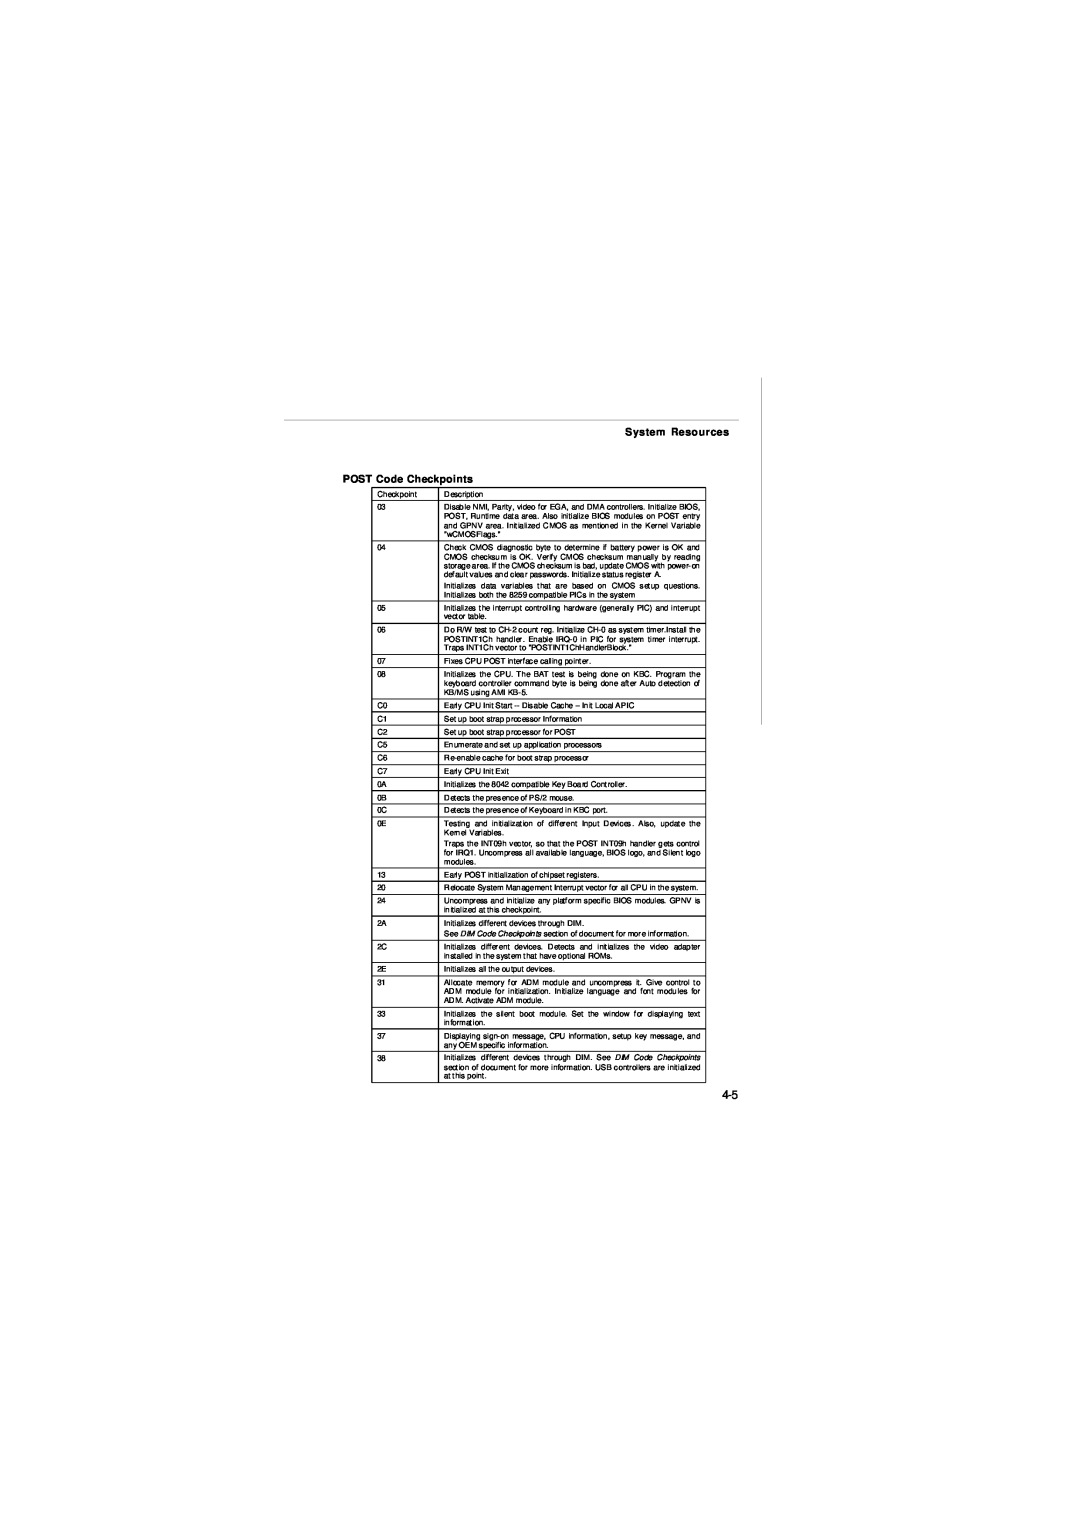 Intel IM-Q35 Series manual POST Code Checkpoints, System Resources 